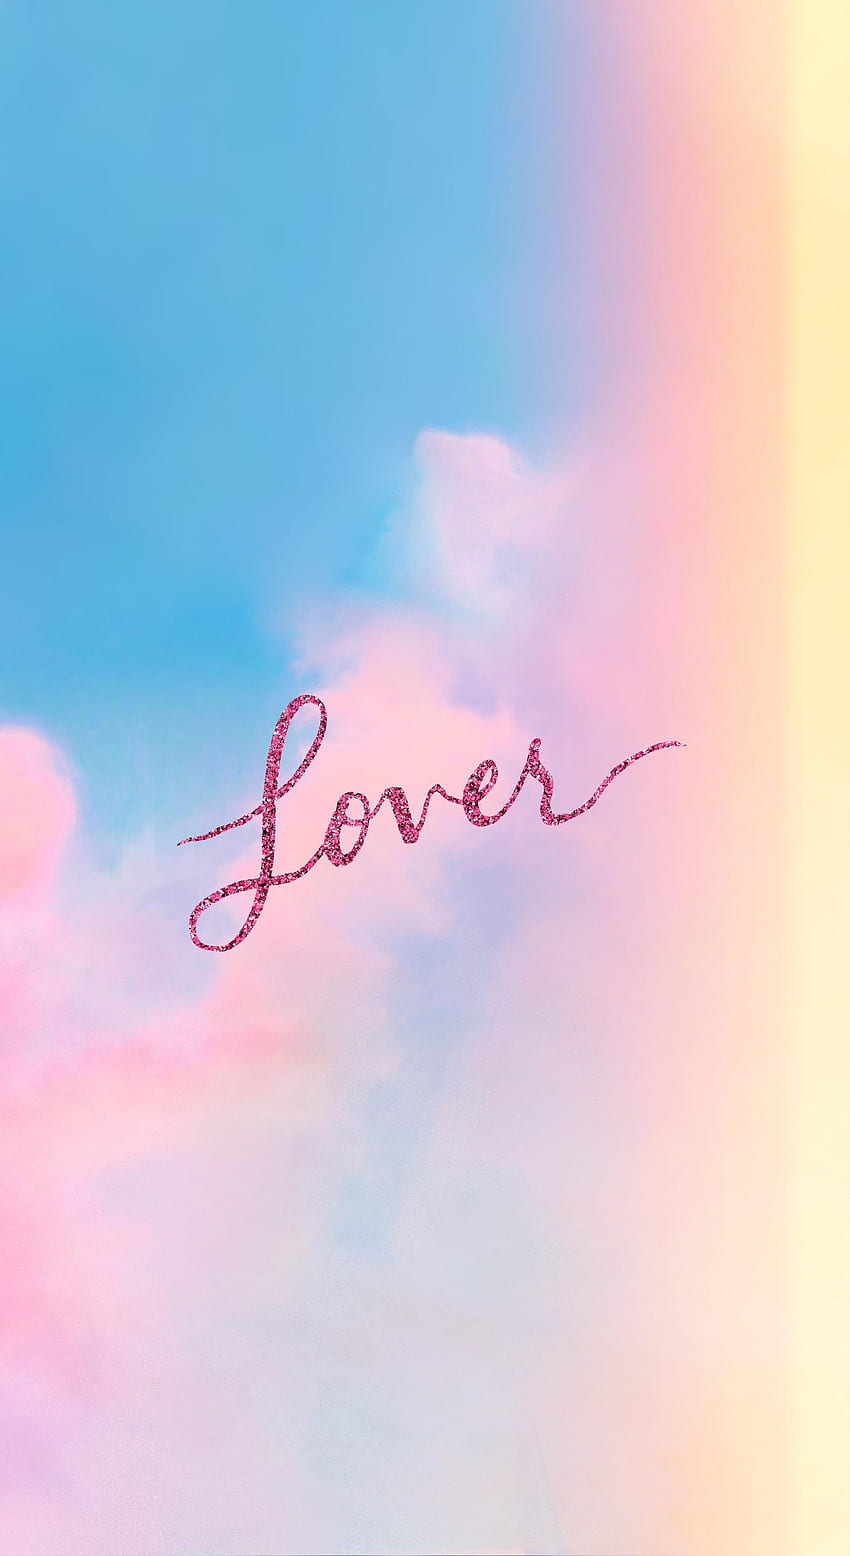 Hey kids, editing is fun! Made this with the Lover, Taylor Swift Lover HD phone wallpaper